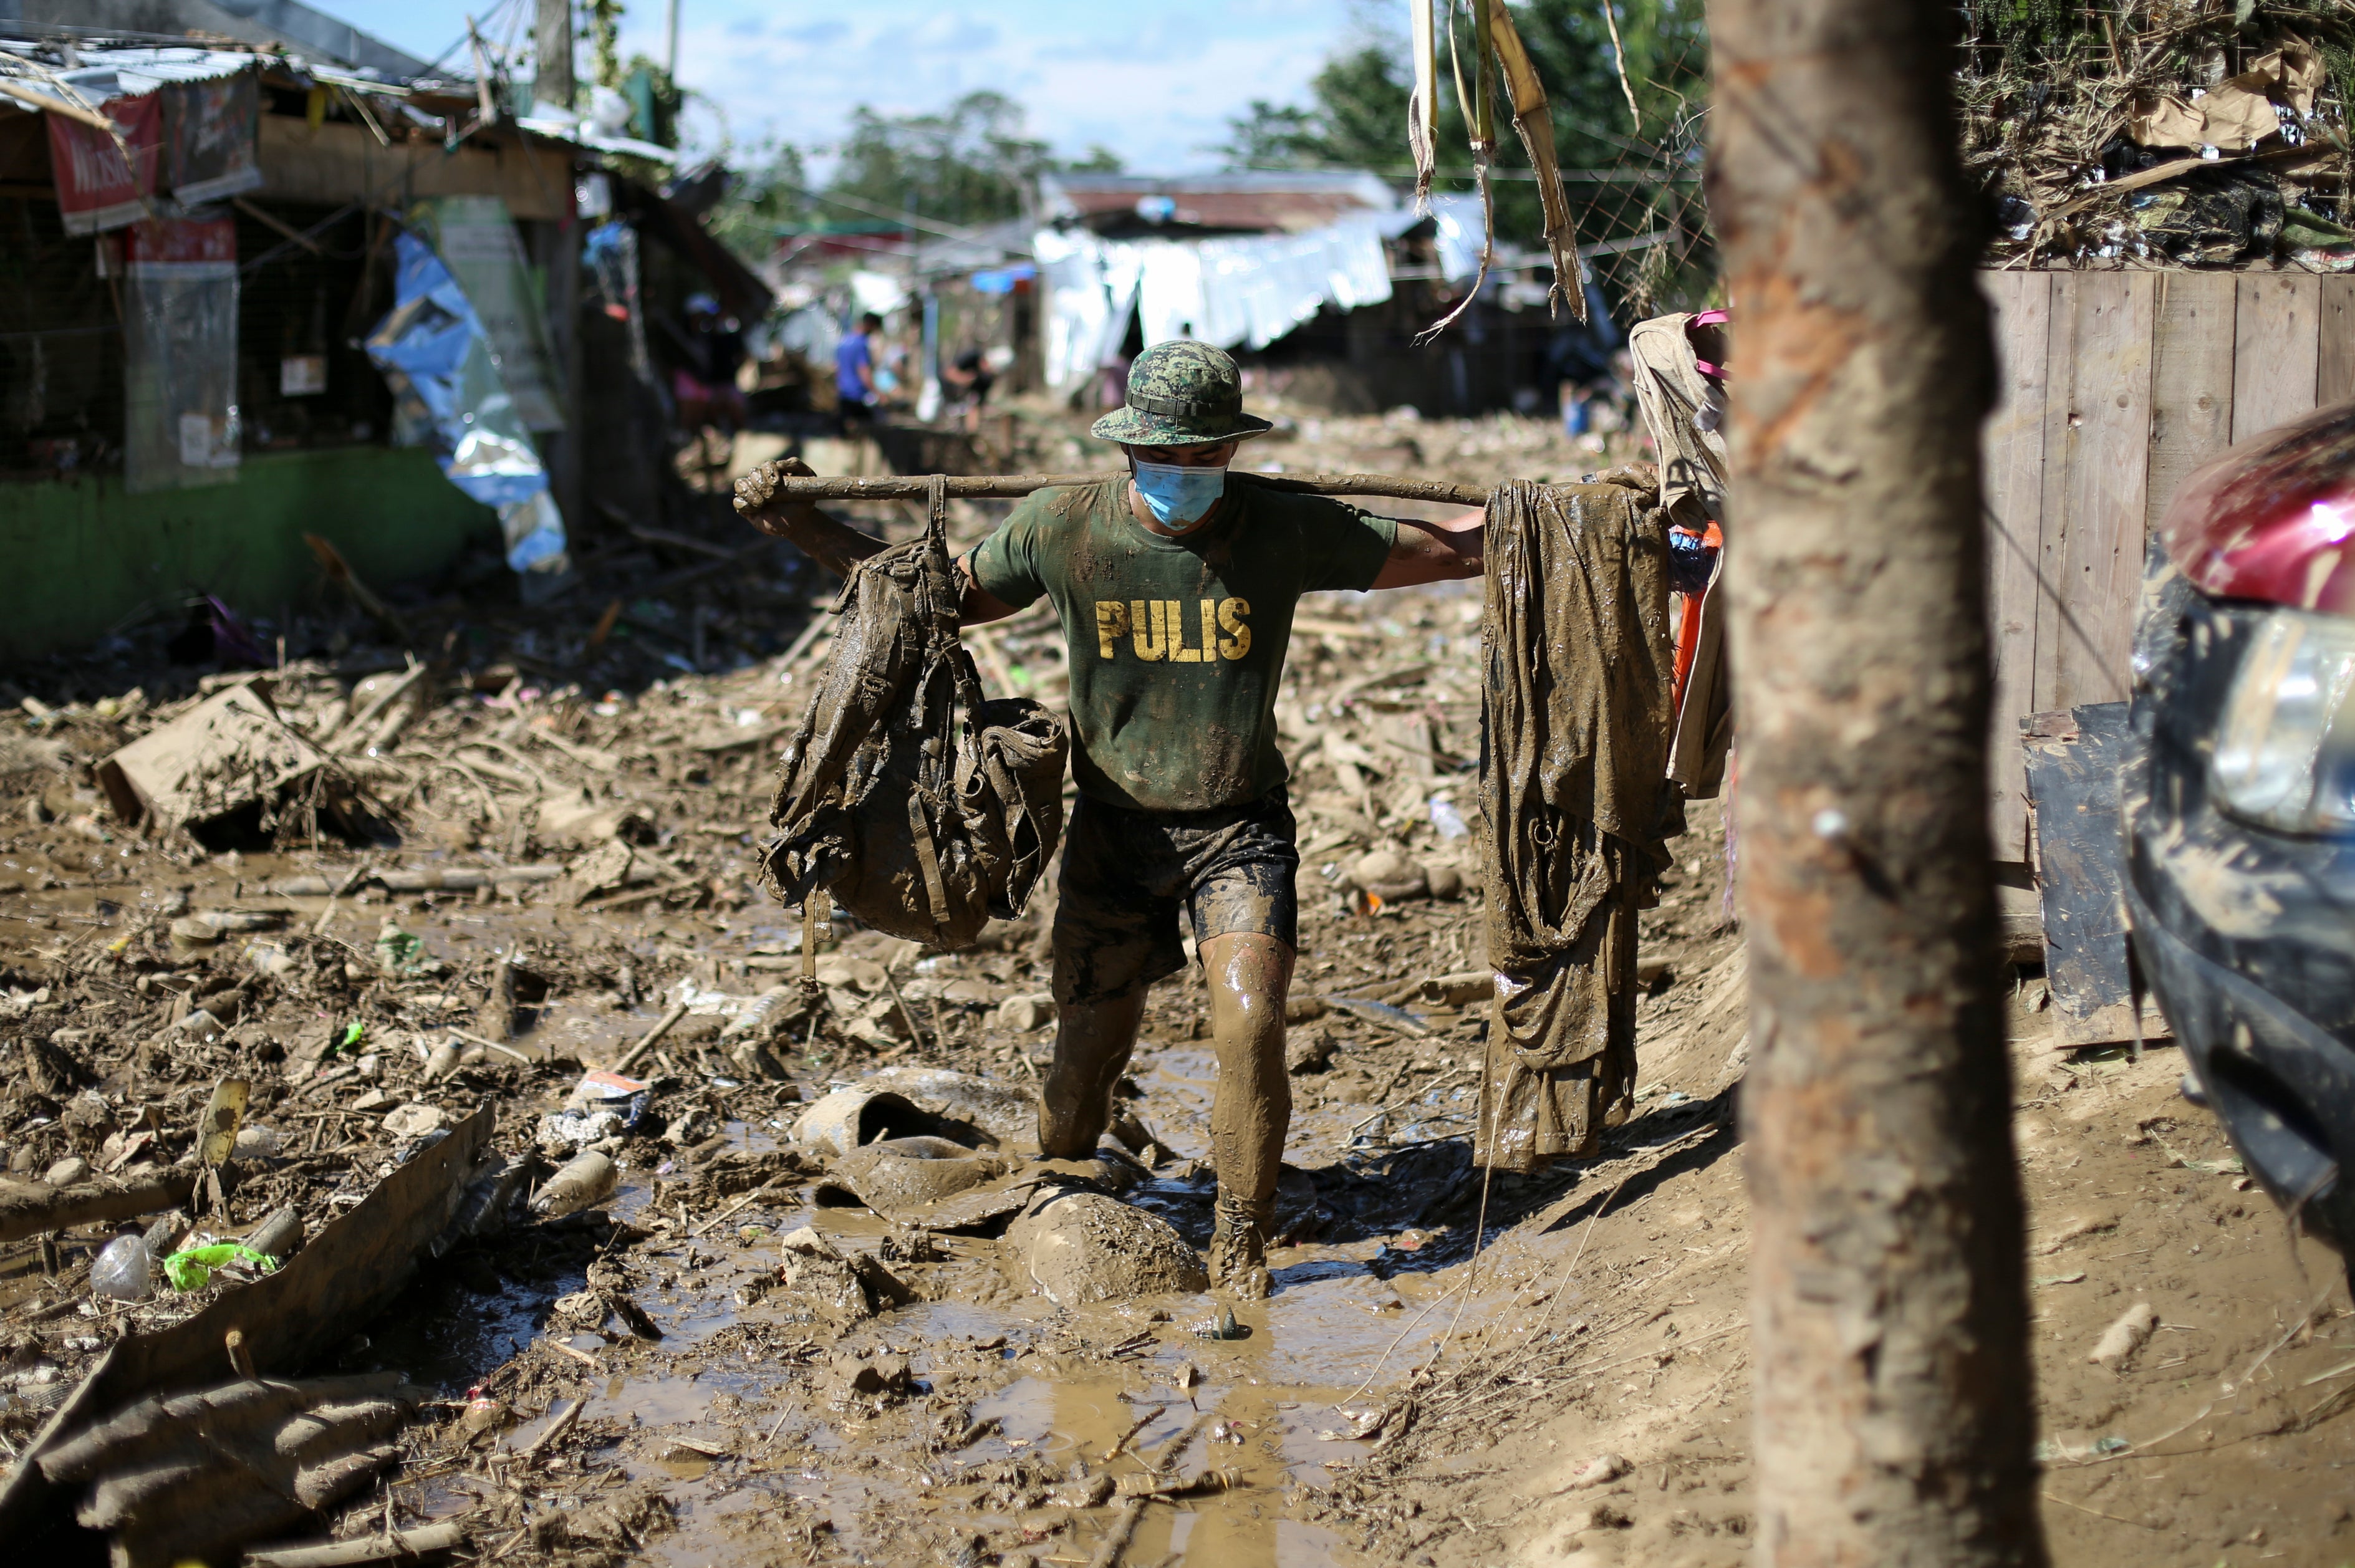 A man works in the aftermath of a typhoon in the Philippines